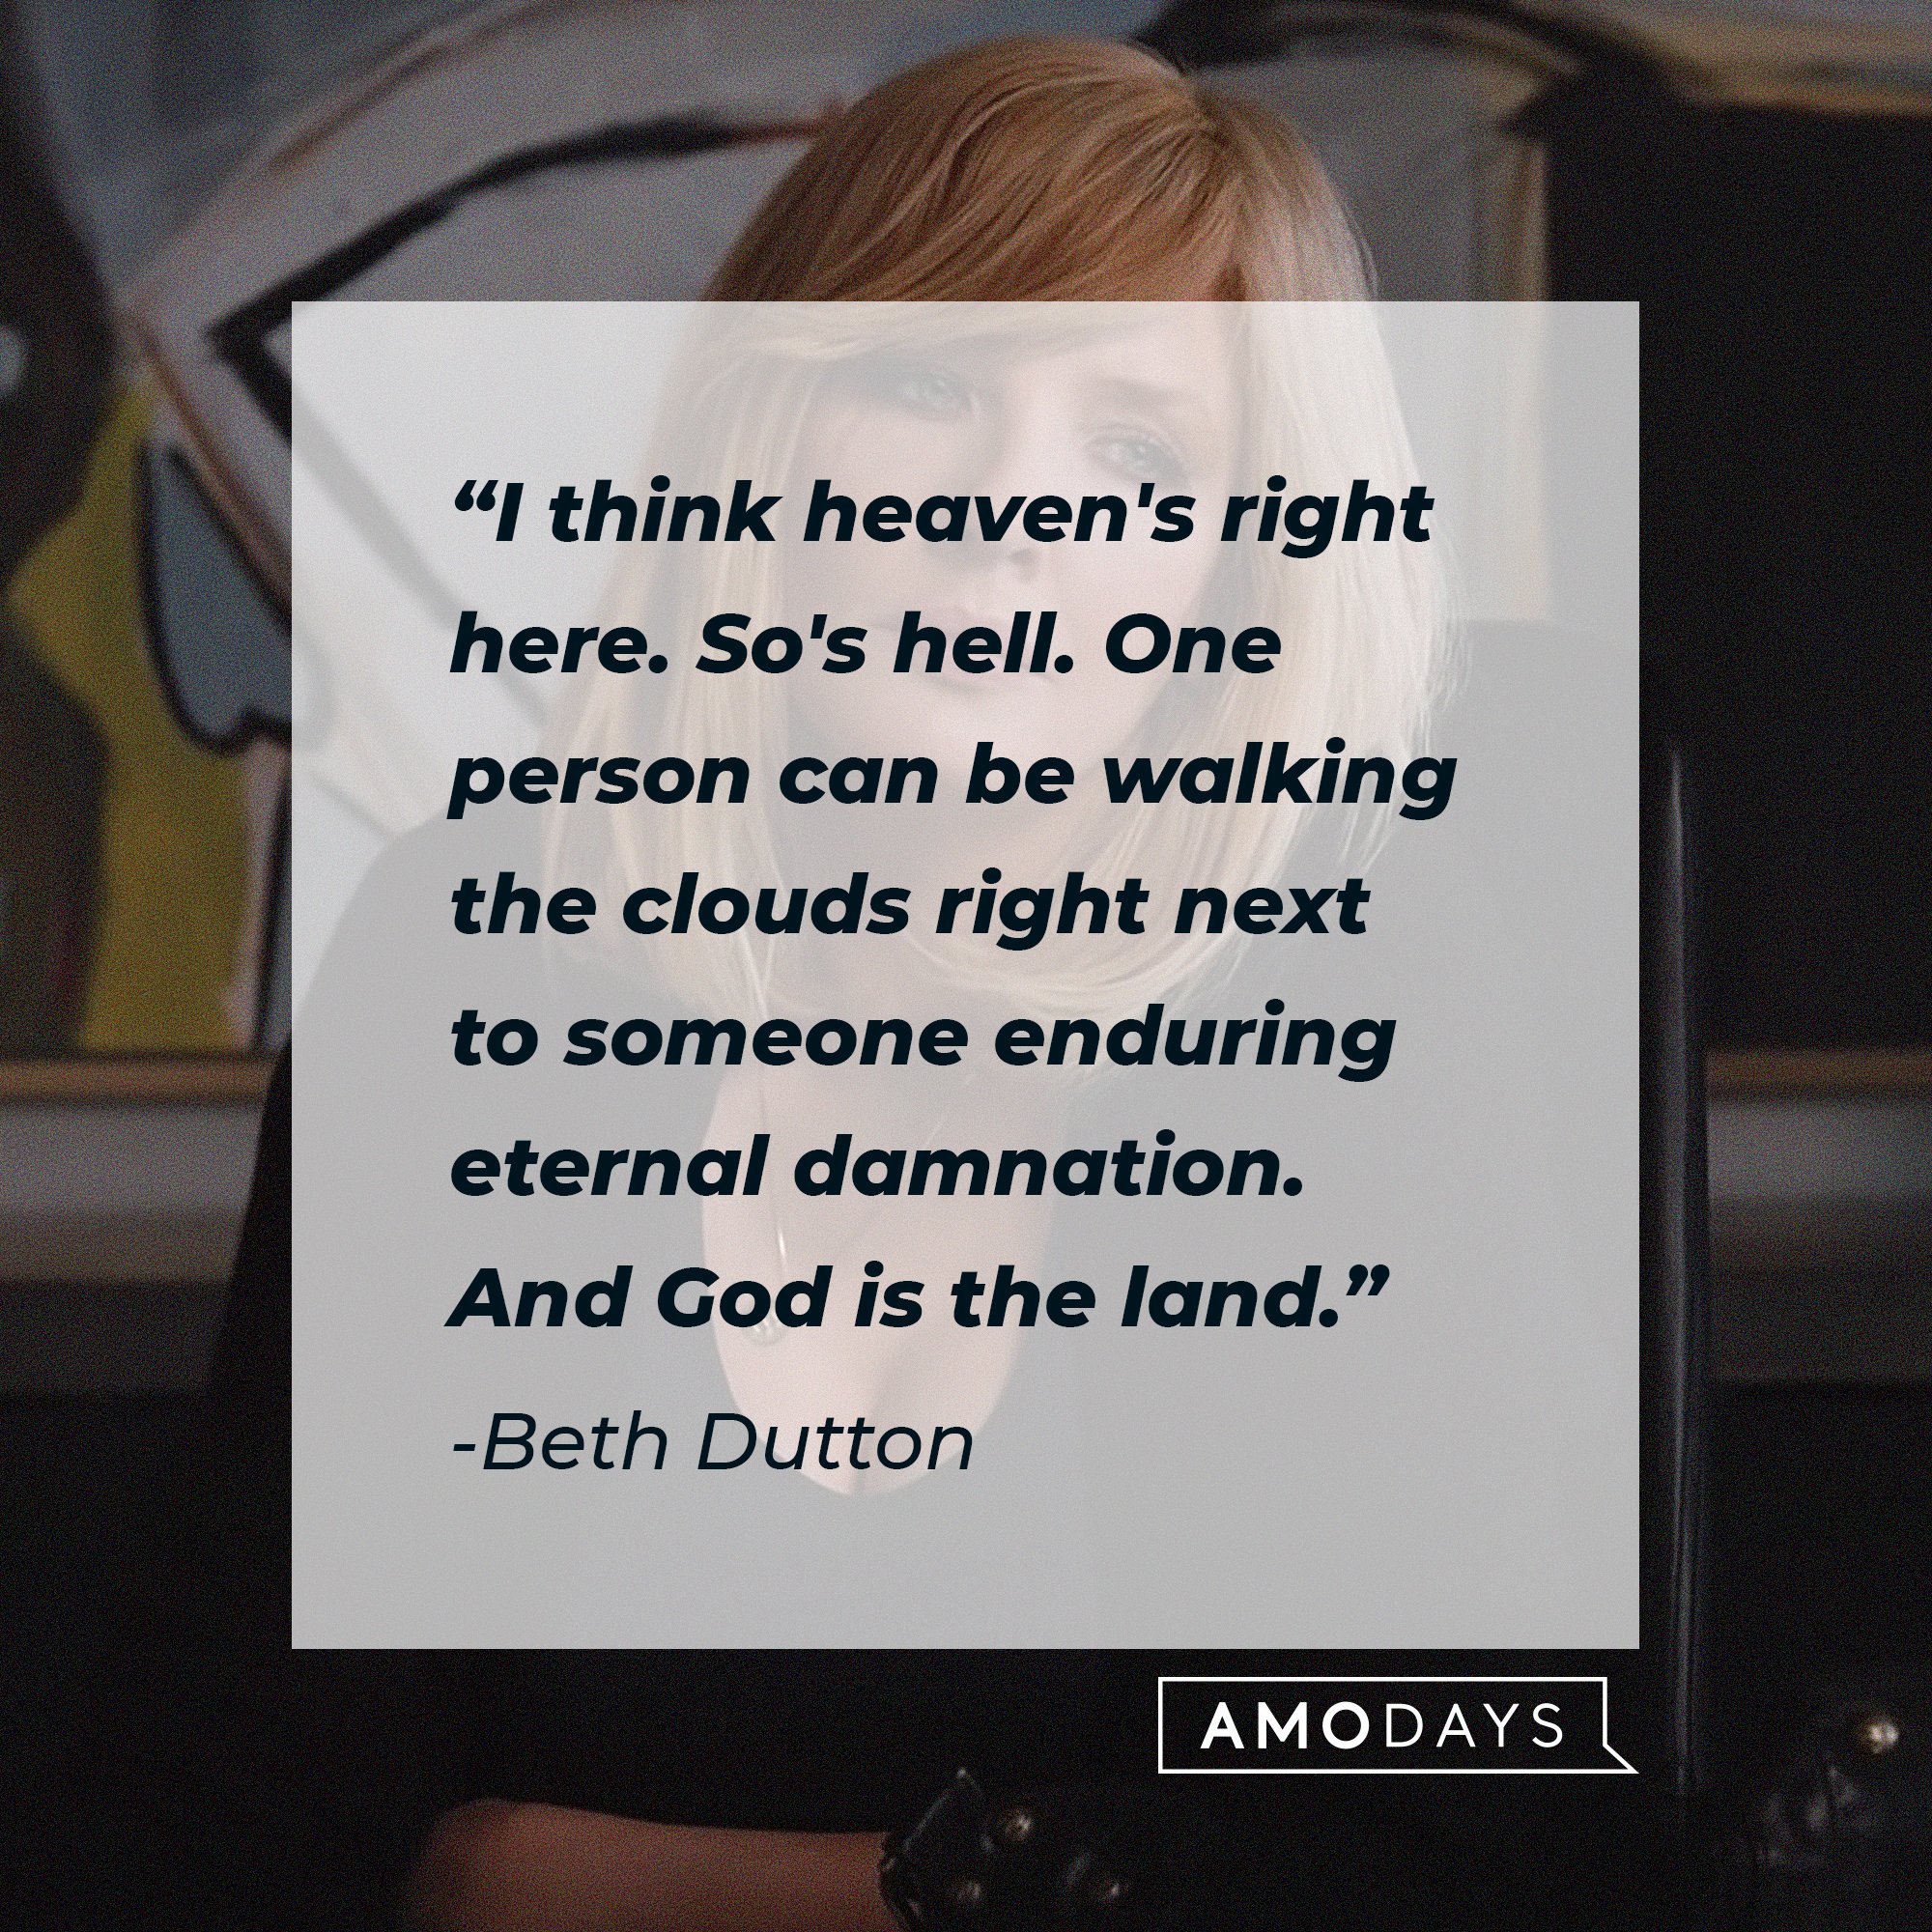  Beth Dutton's quote: "I think heaven's right here. So's hell. One person can be walking the clouds right next to someone enduring eternal damnation. And God is the land." | Source: AmoDays